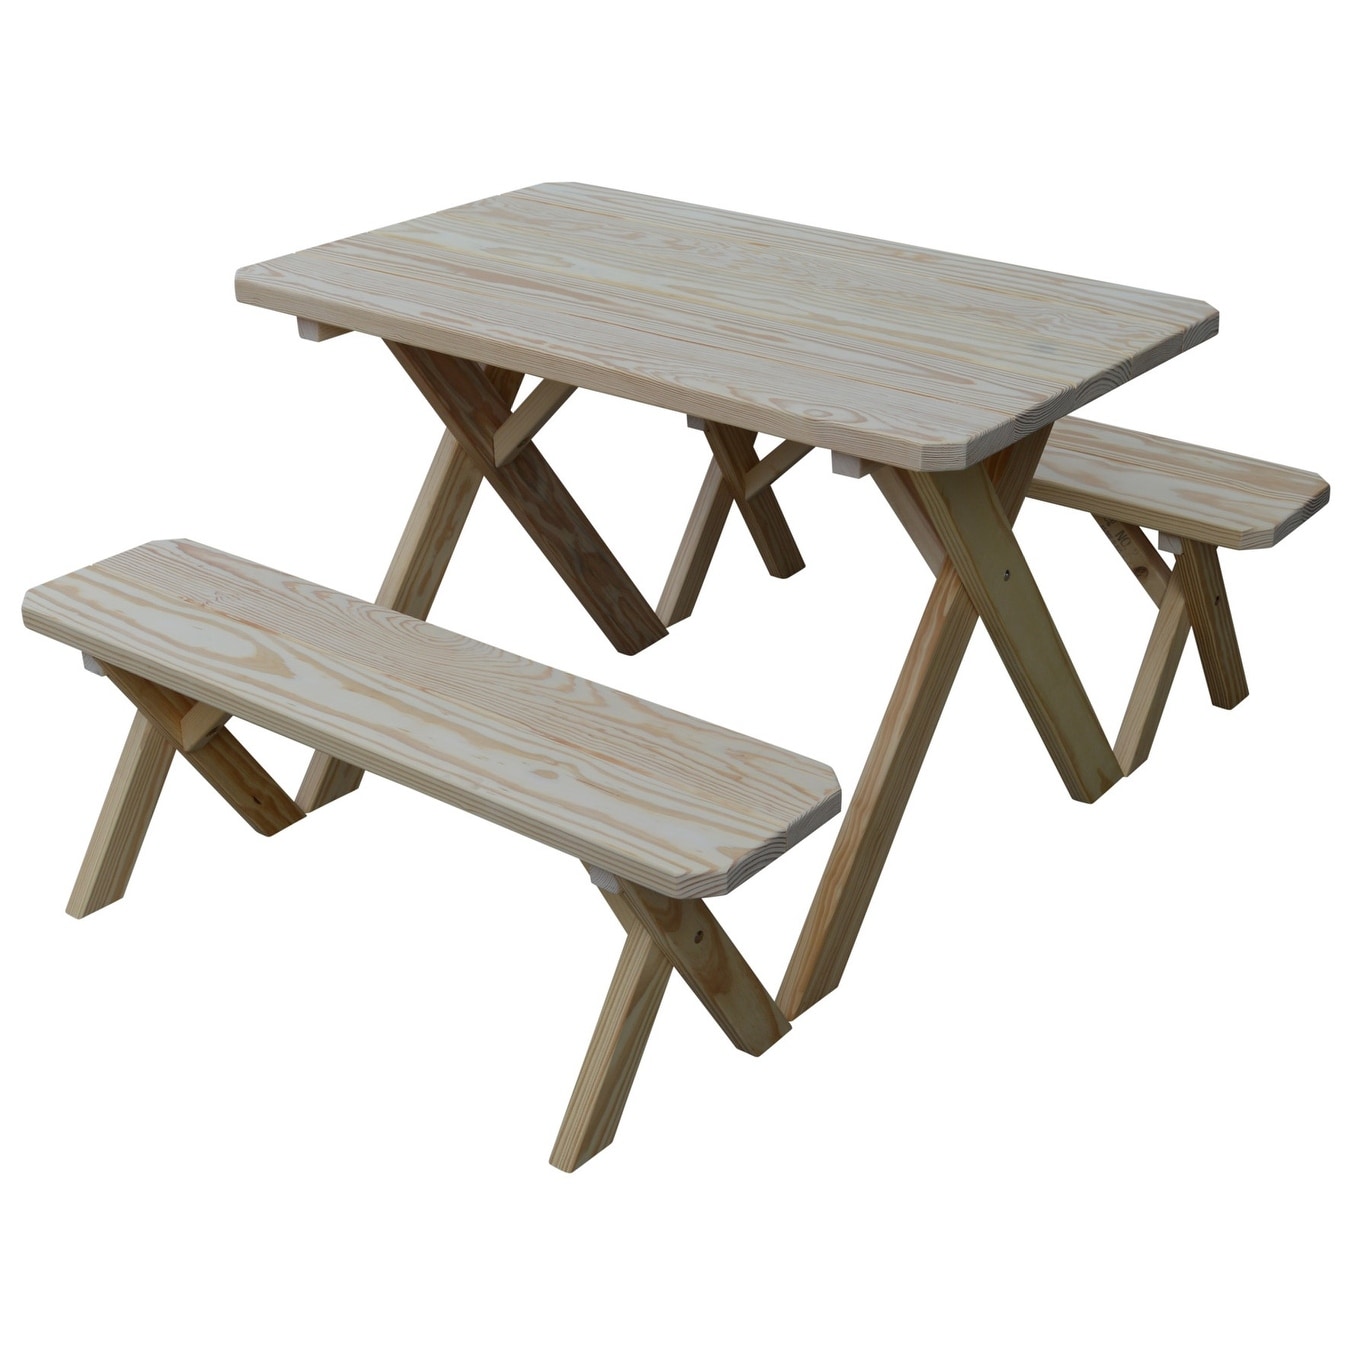 Pressure Treated Pine 4 Cross-leg Picnic Table With 2 Benches